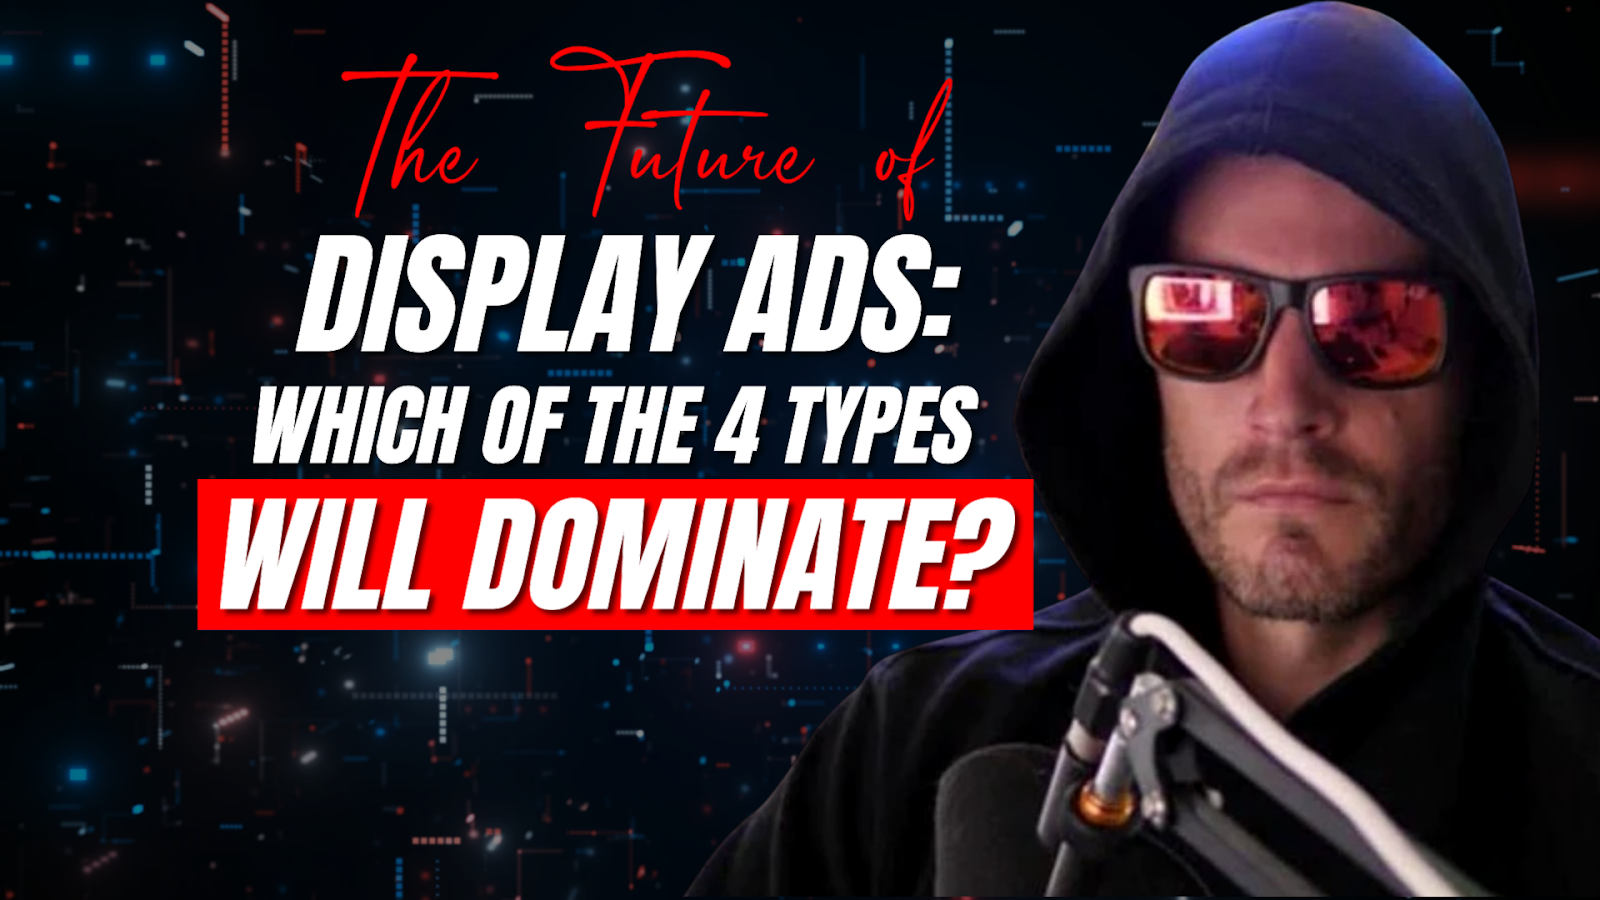 The Future of Display Ads: Which of the 4 Types Will Dominate?